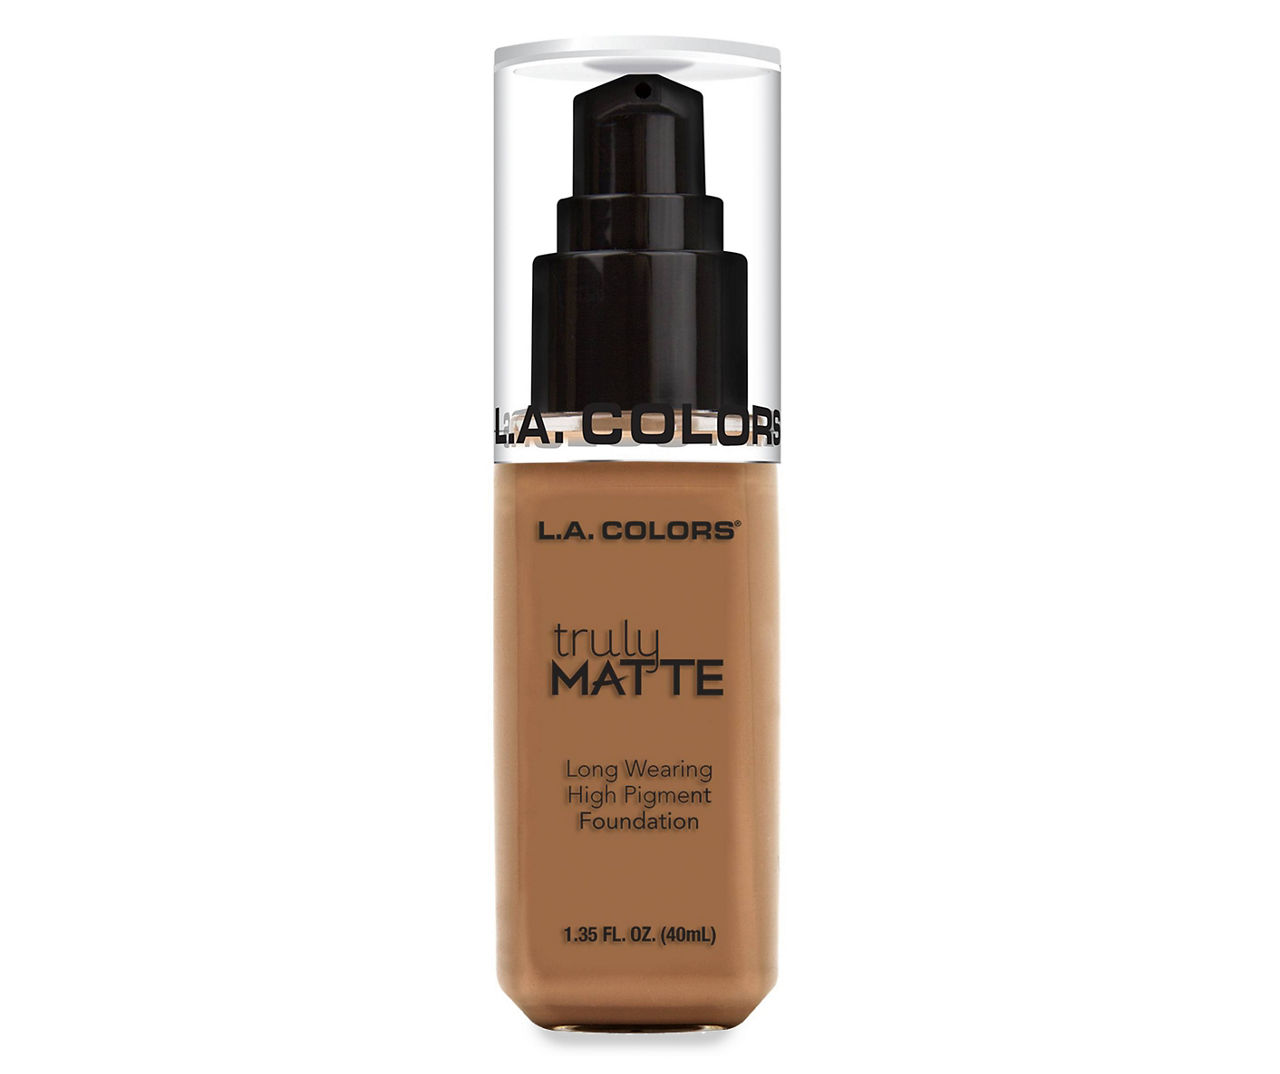 Truly Matte Foundation in Deep Tan